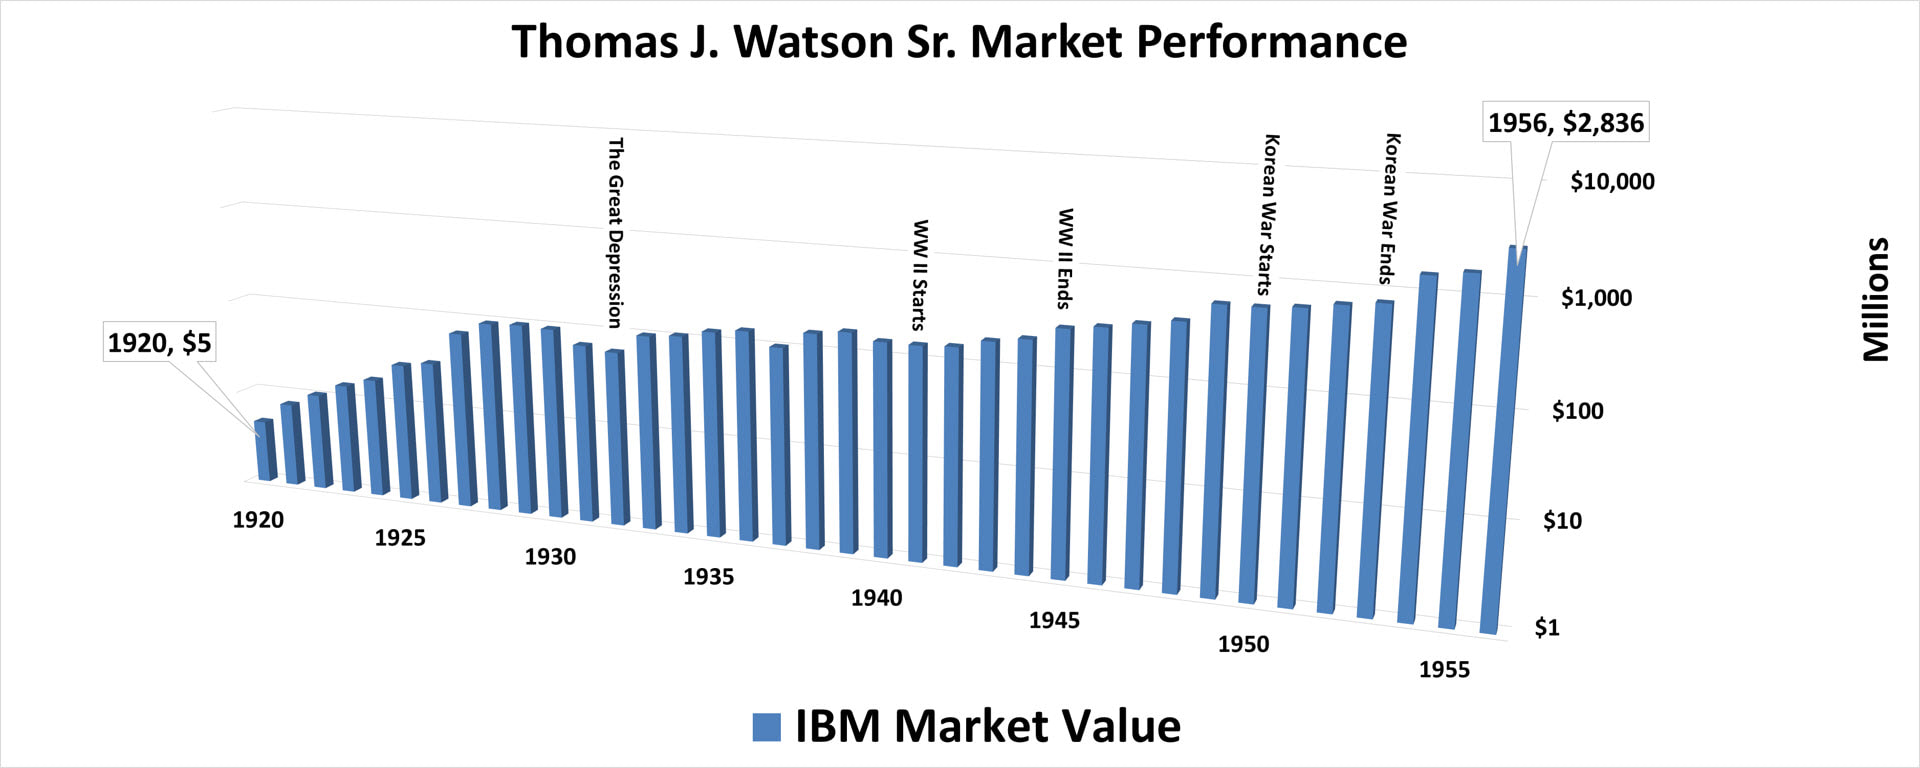 A color bar chart showing IBM's yearly market value from 1920 to 1956 for Chief Executive Officer (CEO) Thomas J. Watson Sr.